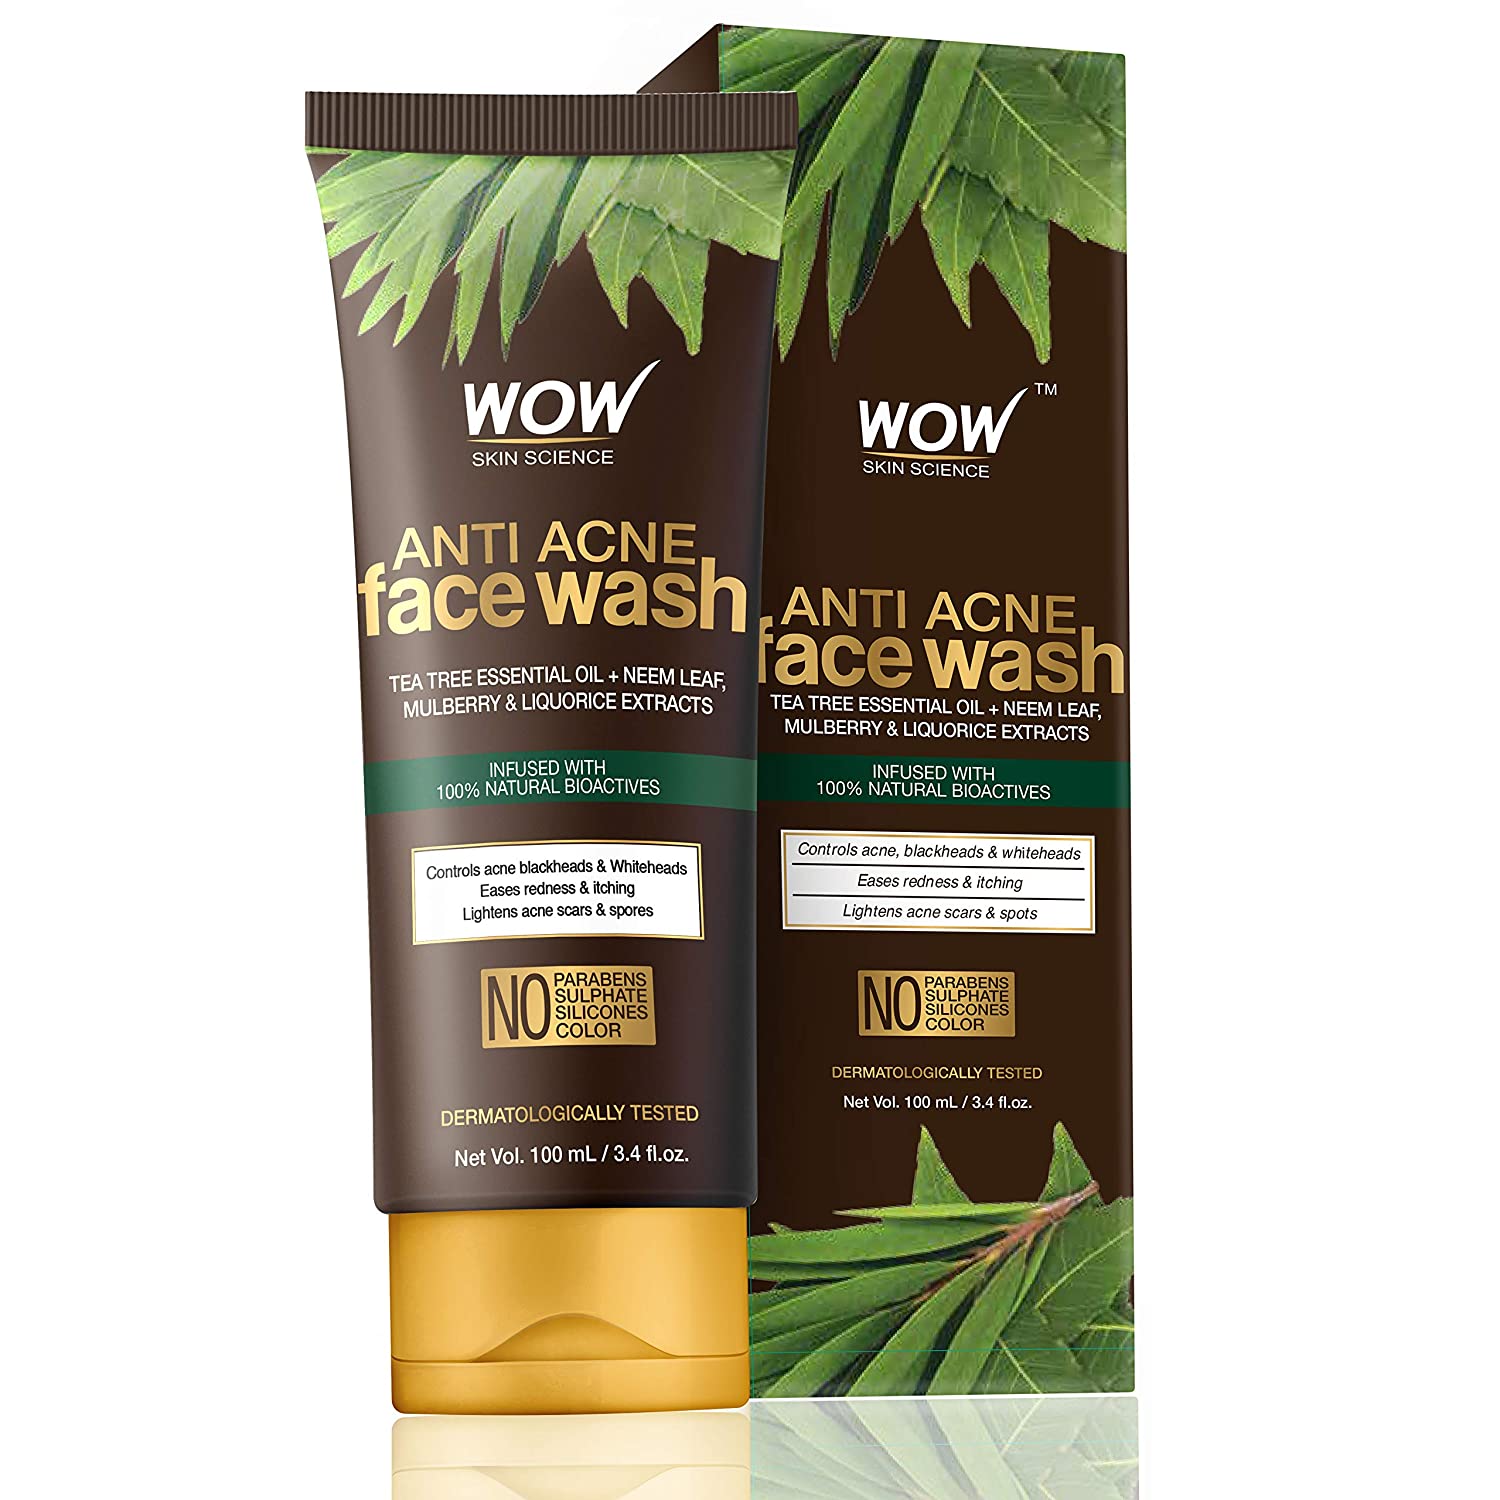 WOW Skin Science Anti Acne Face Wash ﻿﻿